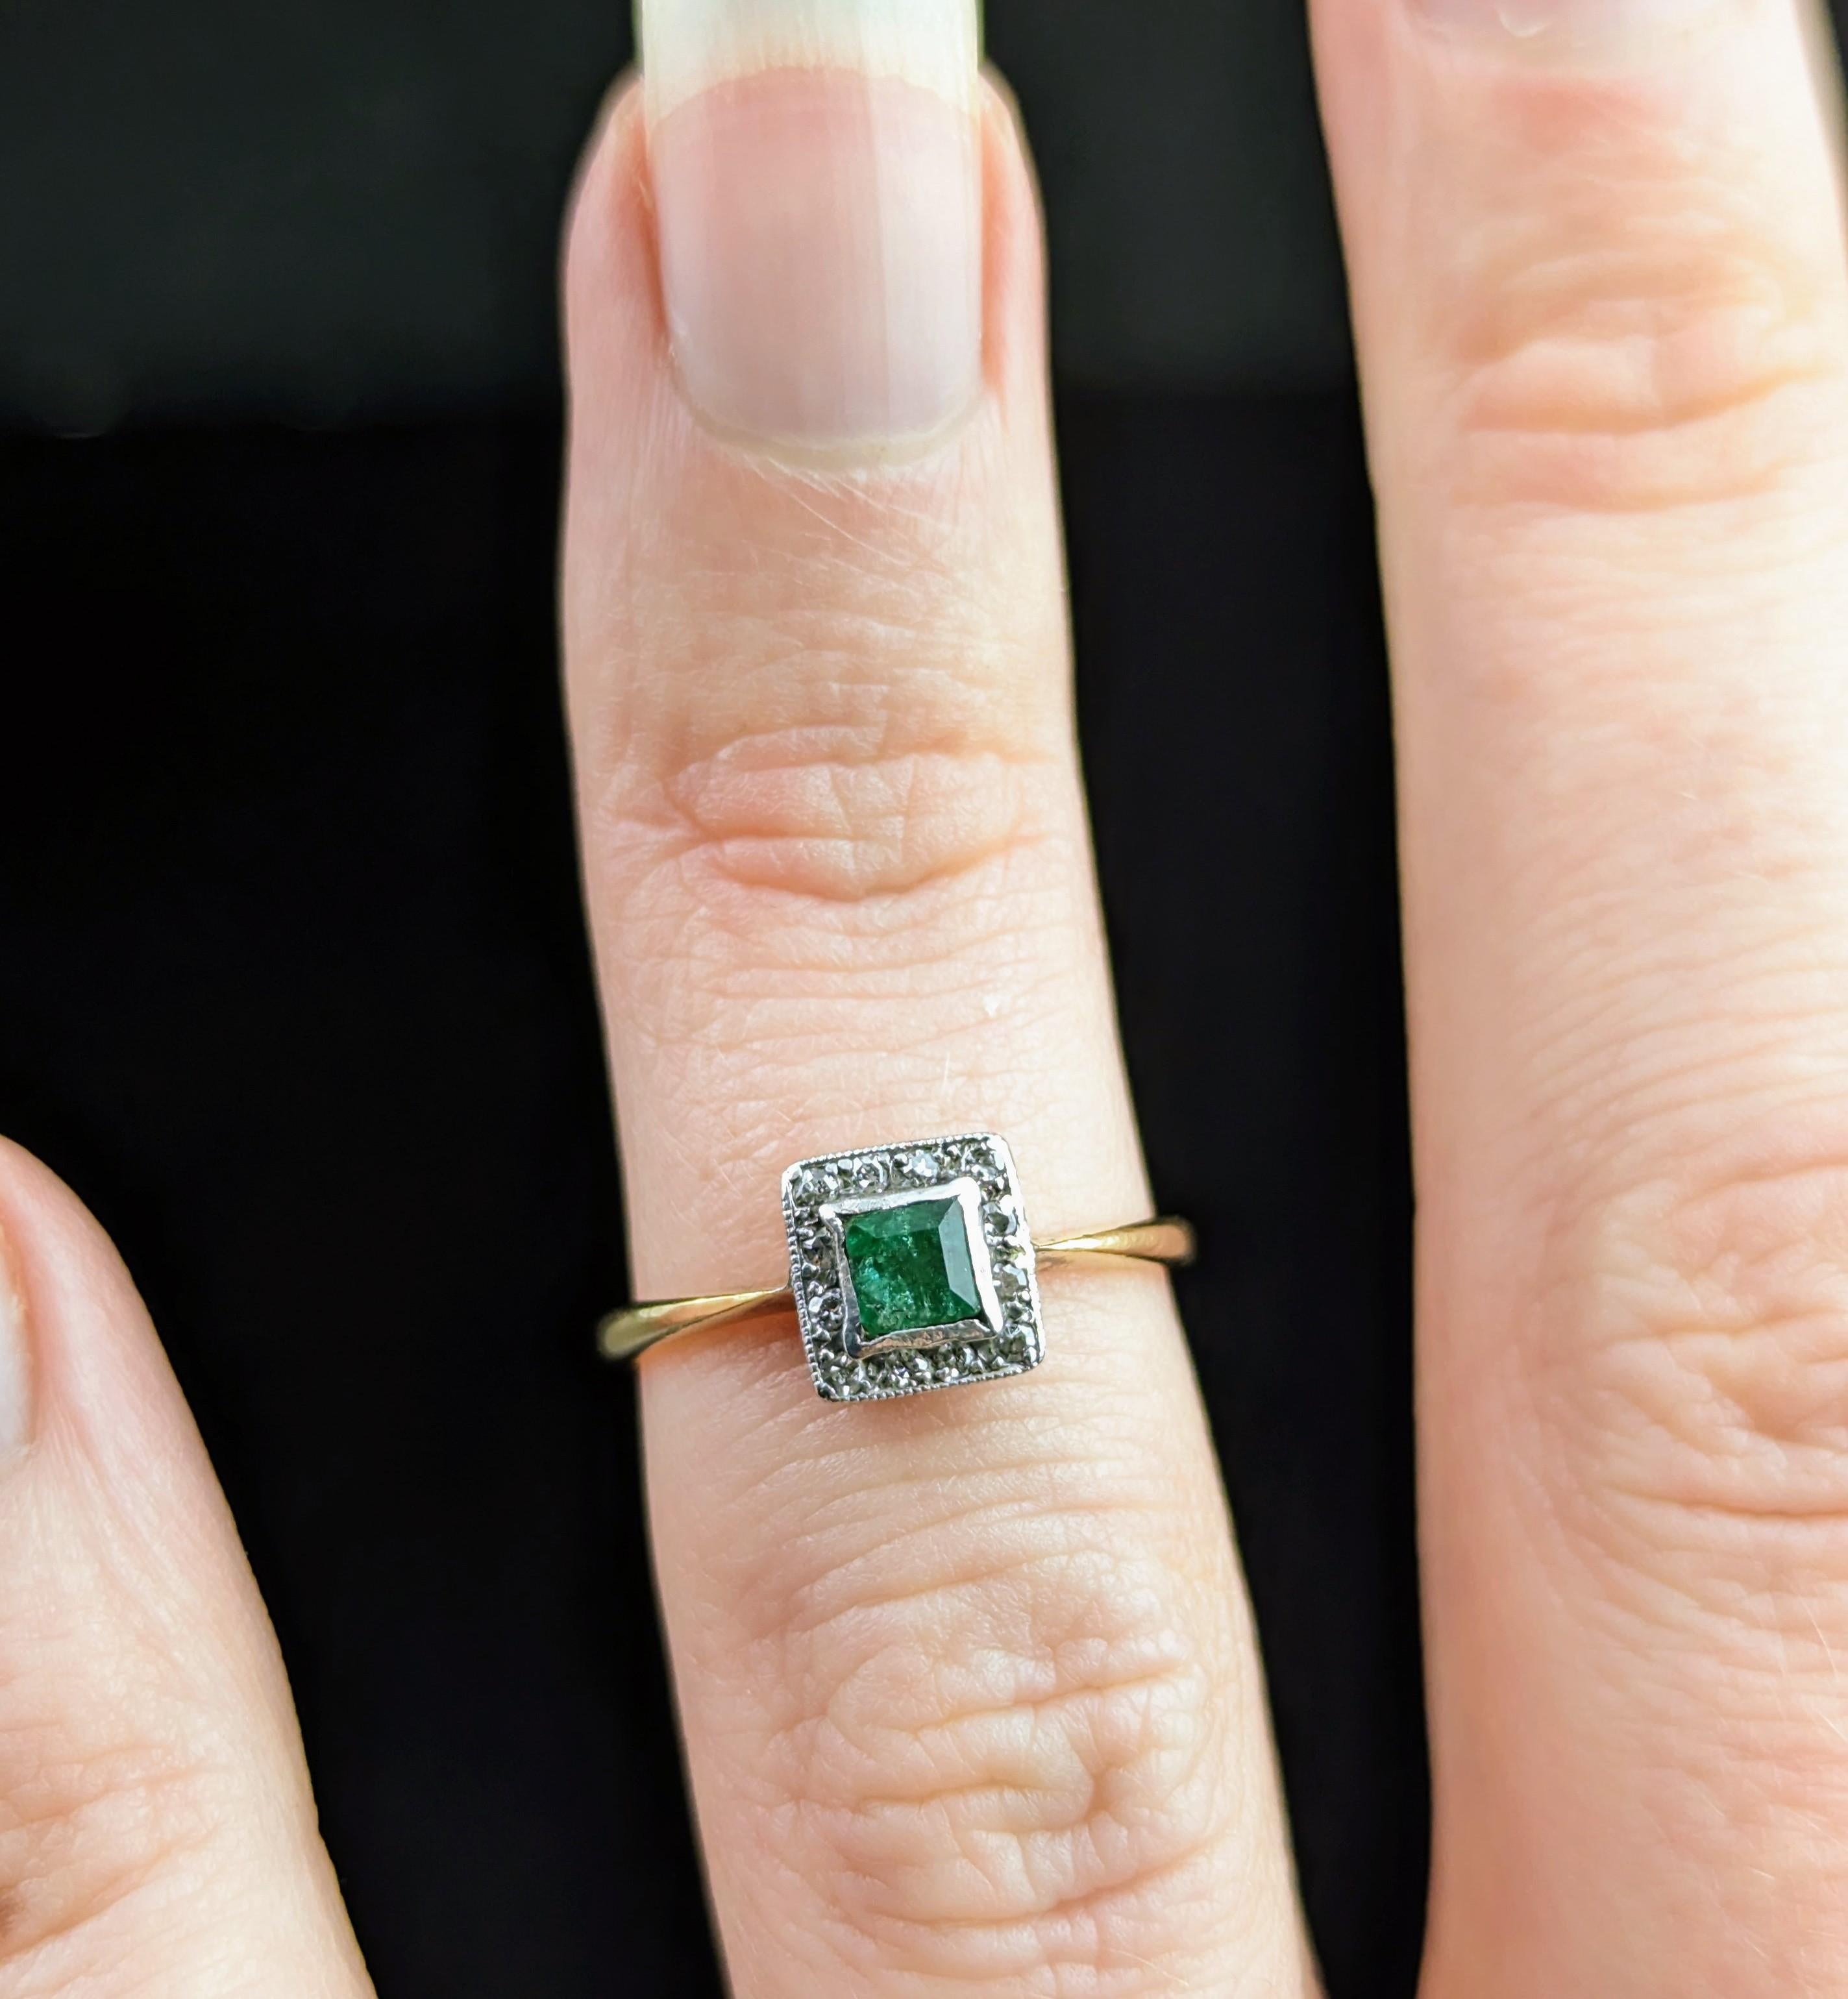 Vintage Art Deco Emerald and Diamond Ring, 18k Gold and Platinum 5